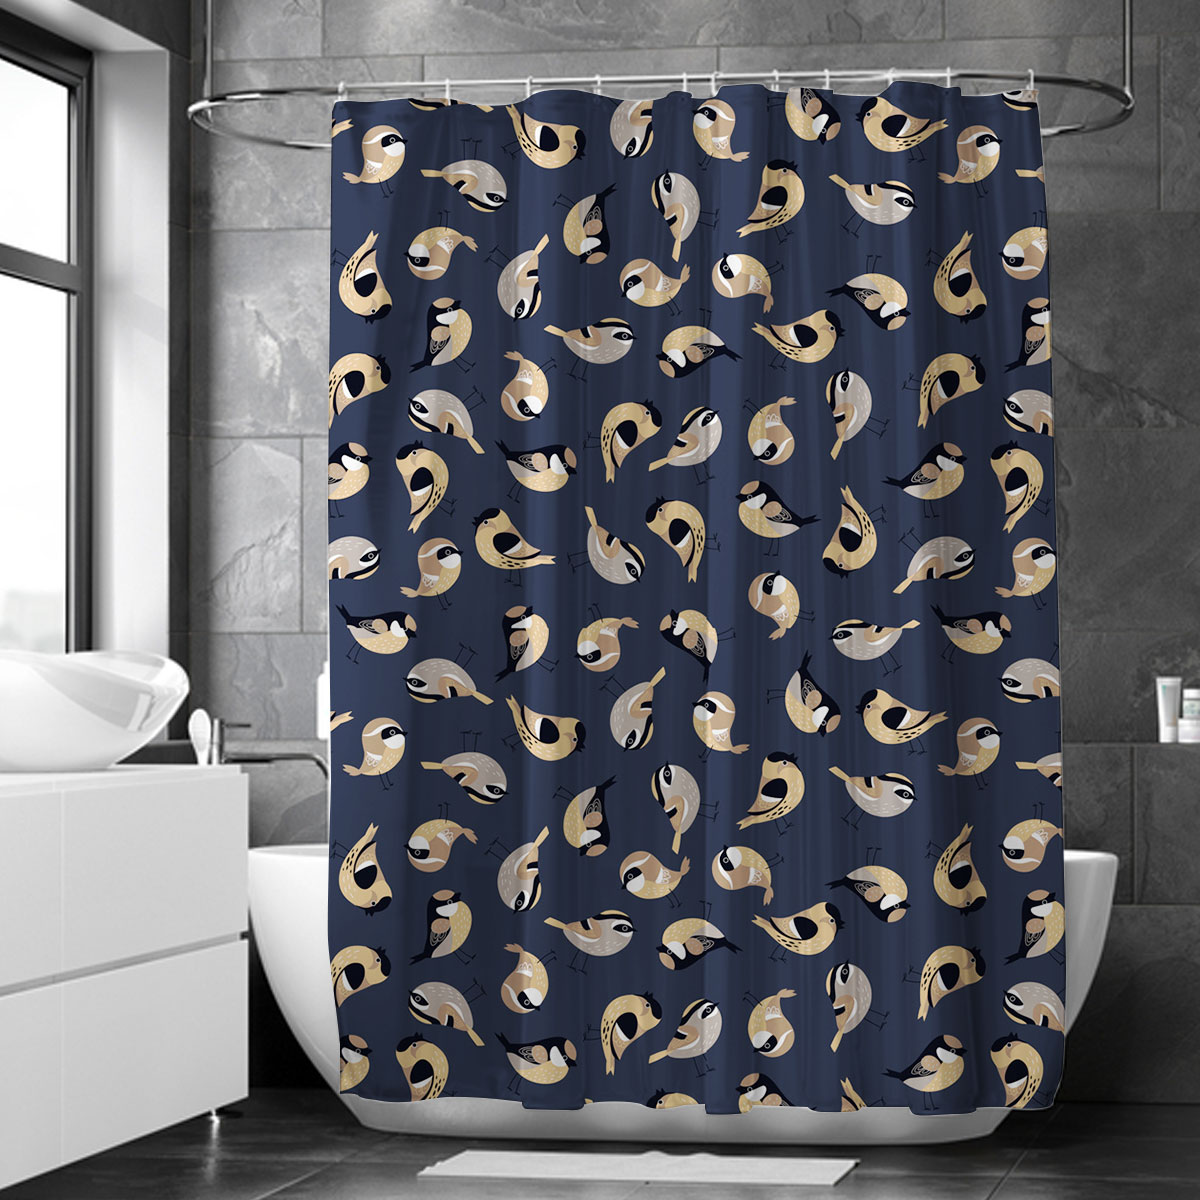 Coon Illustration Finch Shower Curtain